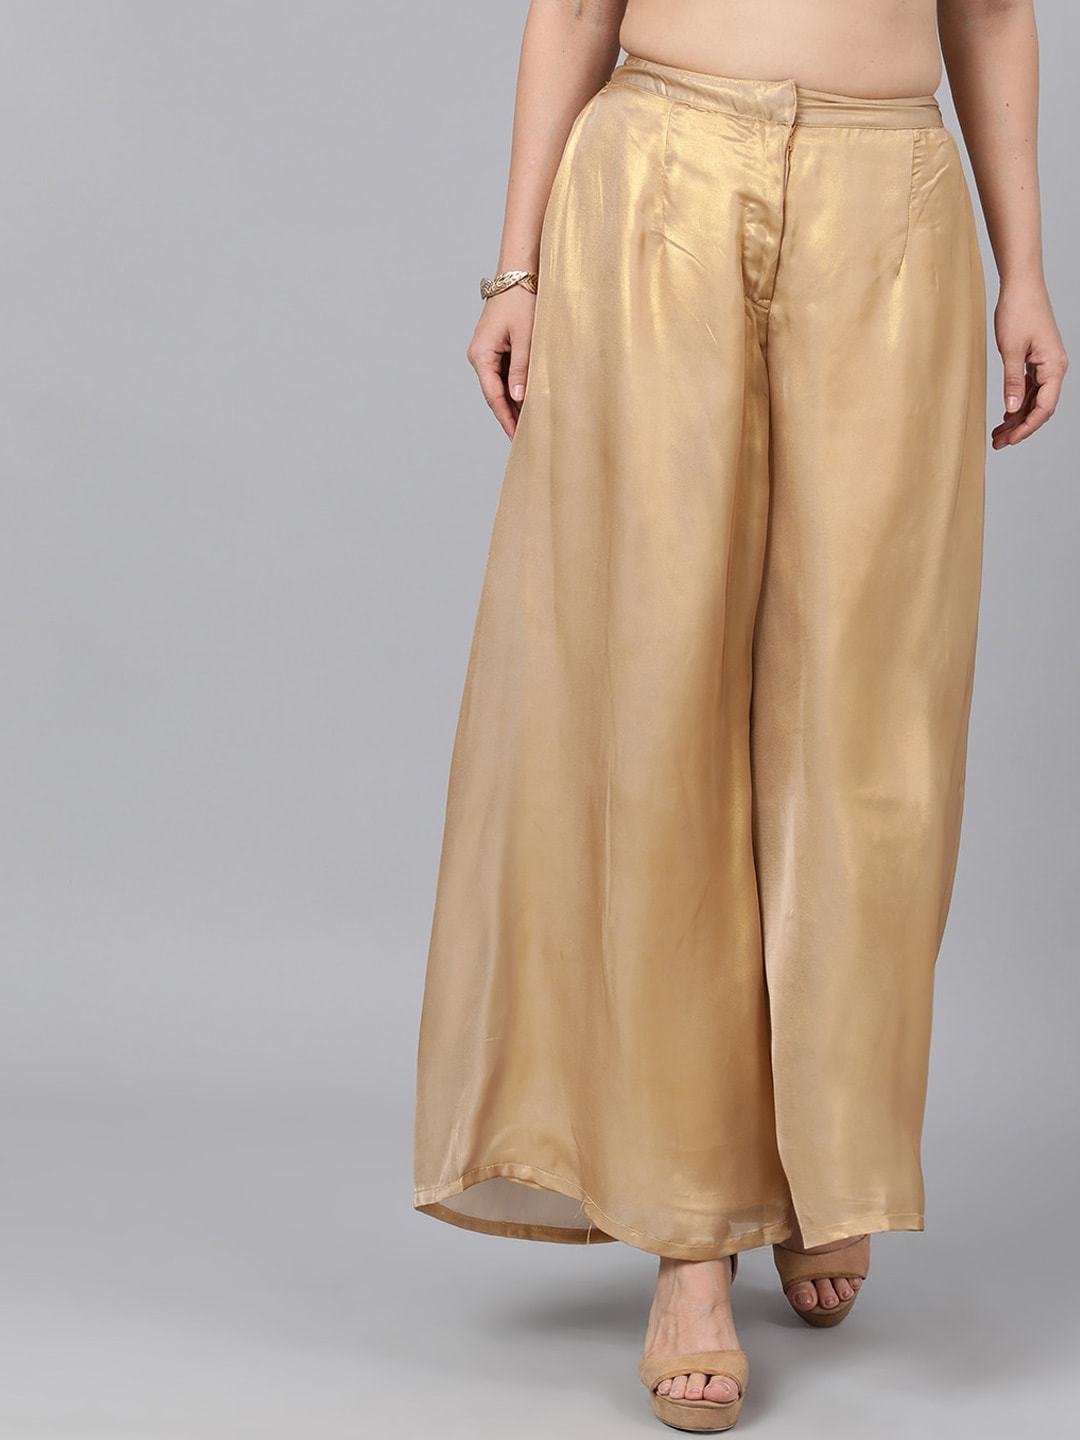 Women's  Gold-Toned Solid Flared Palazzos - AKS